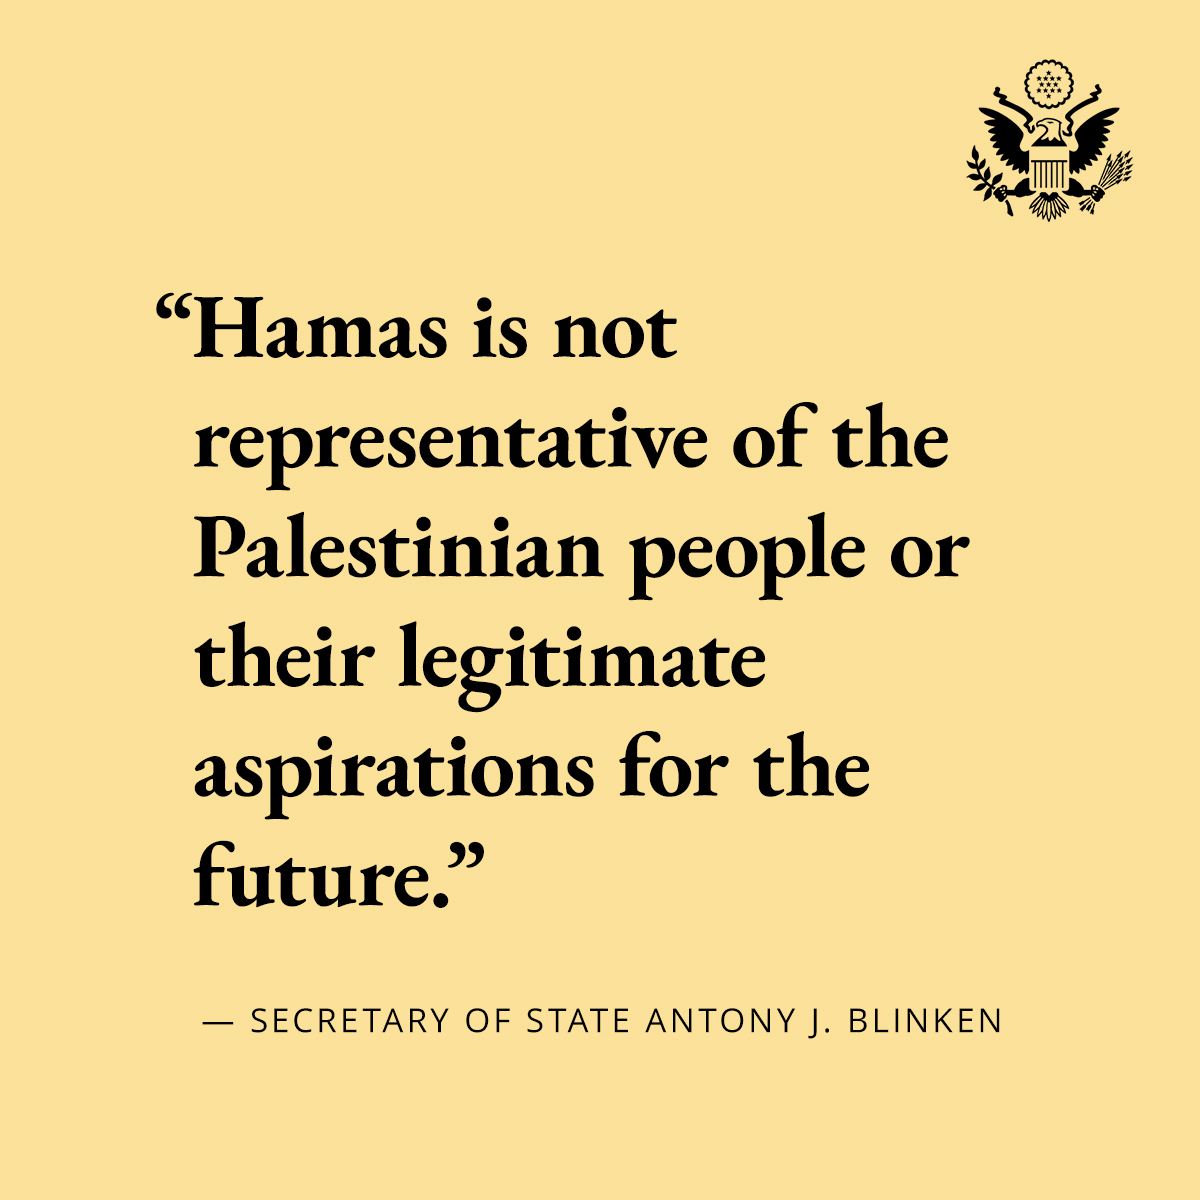 Hamas is a terrorist group. Its only agenda is to destroy the state of Israel and to murder Jews. And it’s important that the entire world see it as such. This is an important moment for moral clarity when it comes to Hamas. - @SecBlinken